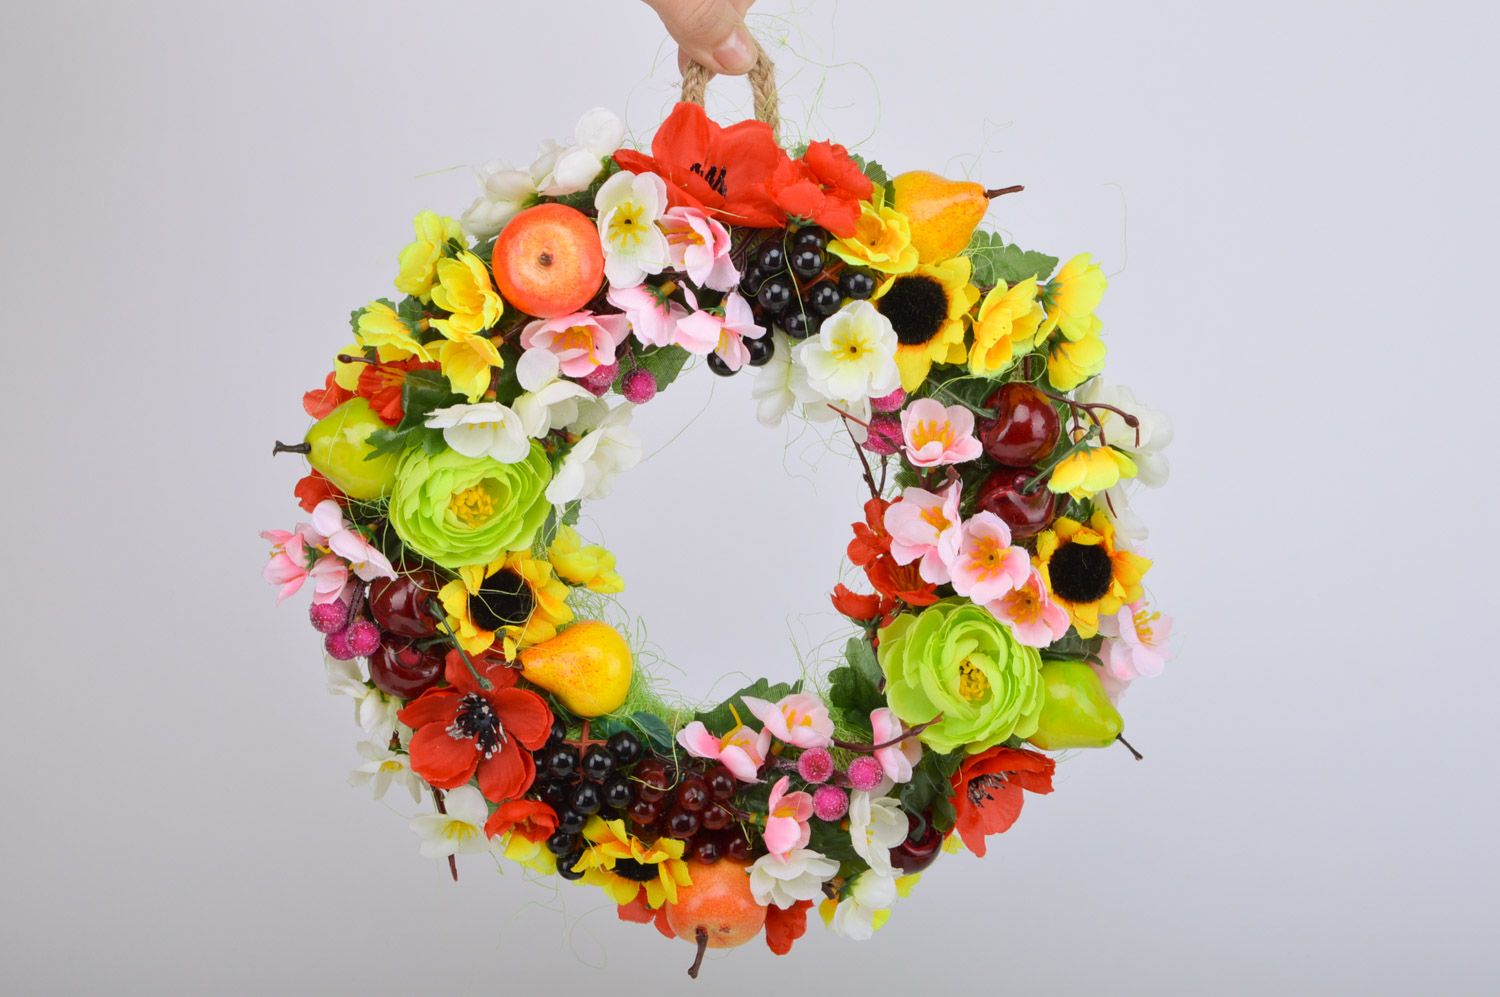 Handmade large bright door wreath with artificial flowers and fruits for home decor photo 3